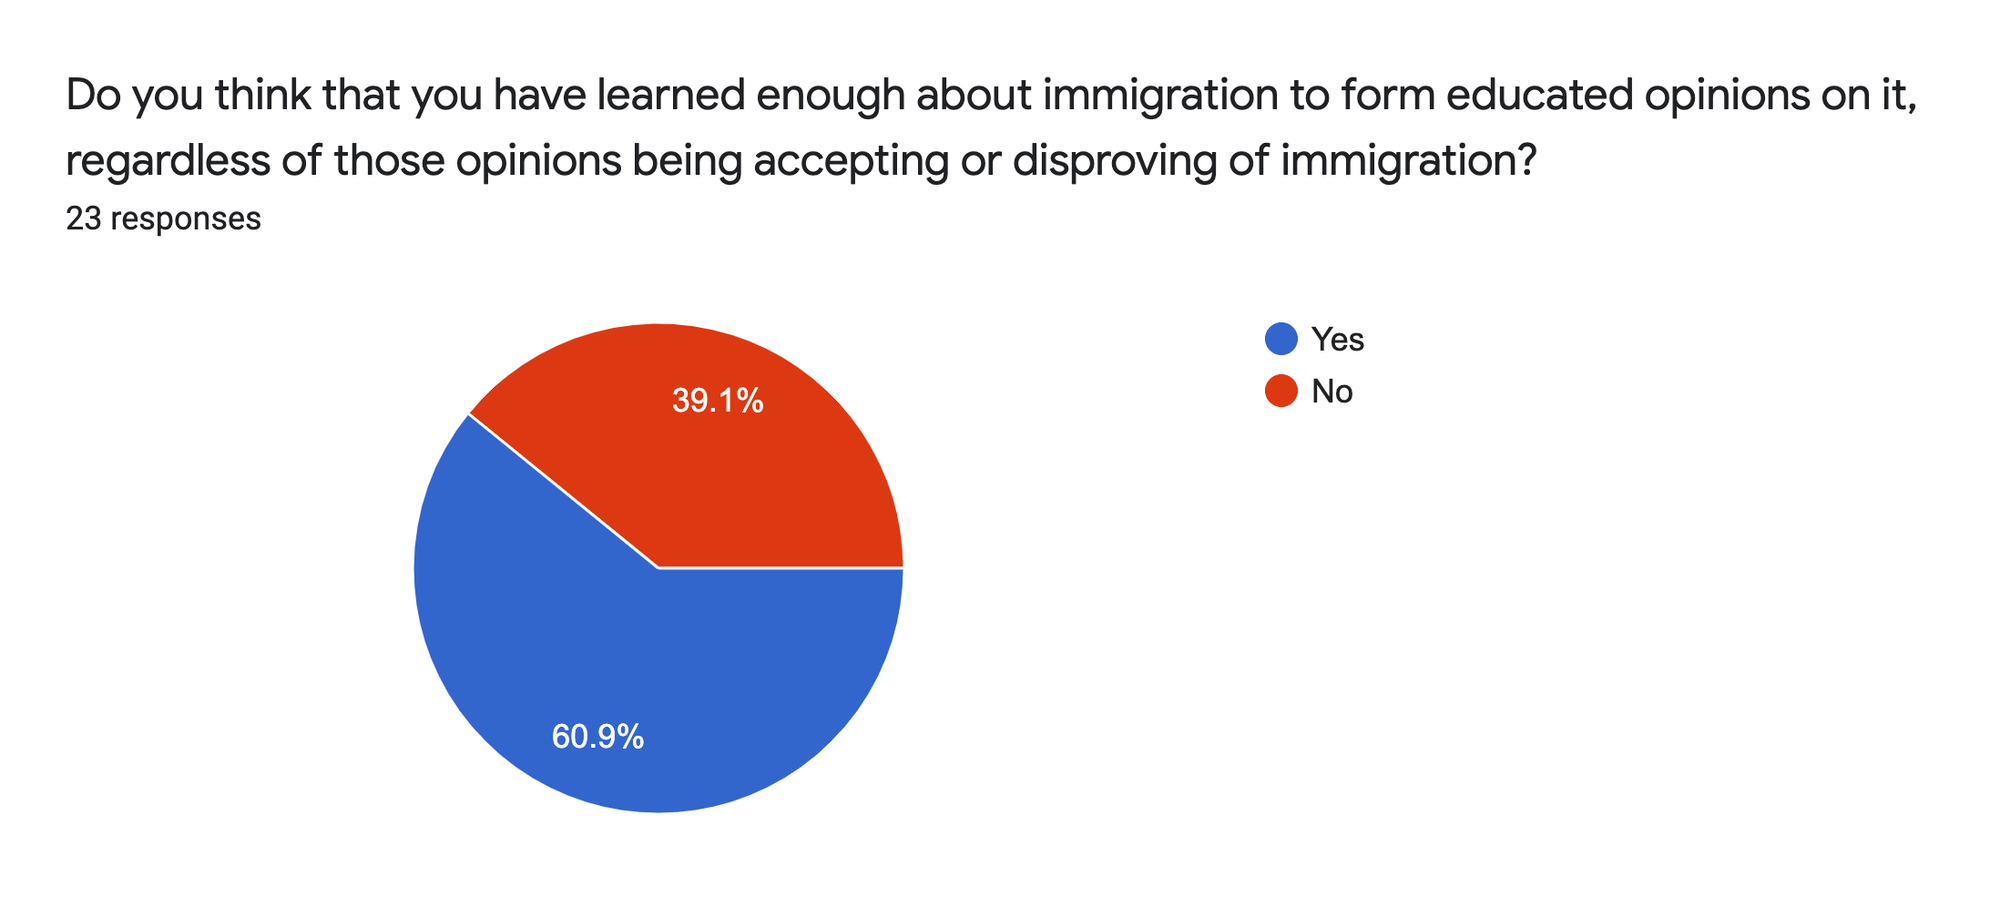 Forms response chart. Question title: Do you think that you have learned enough about immigration to form educated opinions on it, regardless of those opinions being accepting or disproving of immigration?. Number of responses: 23 responses.